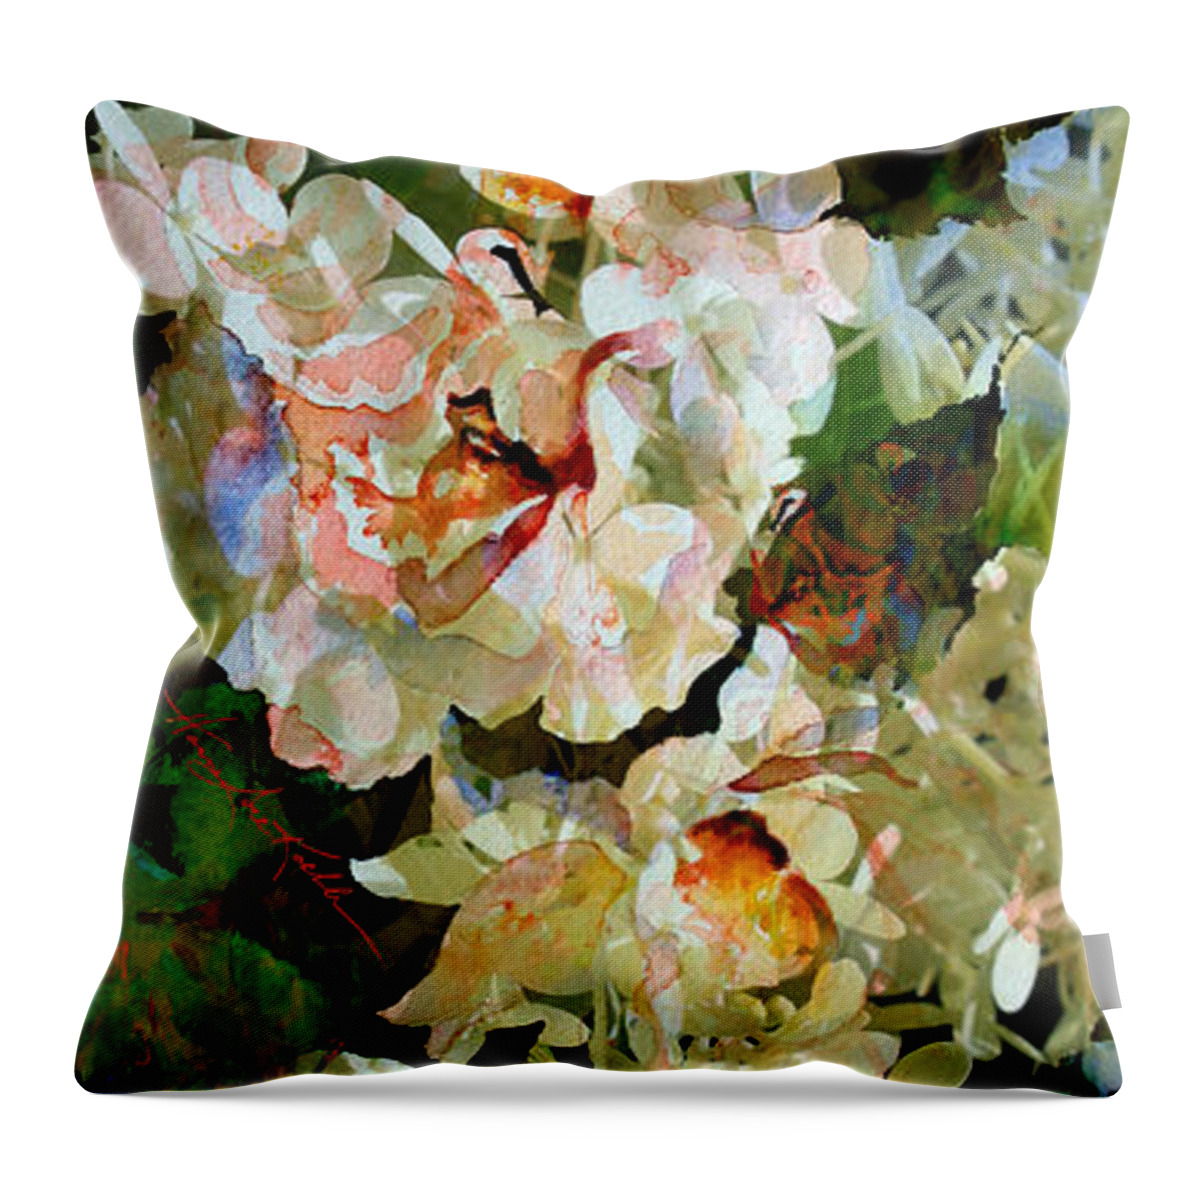 Flowers Throw Pillow featuring the painting Floral Fiction by Hanne Lore Koehler